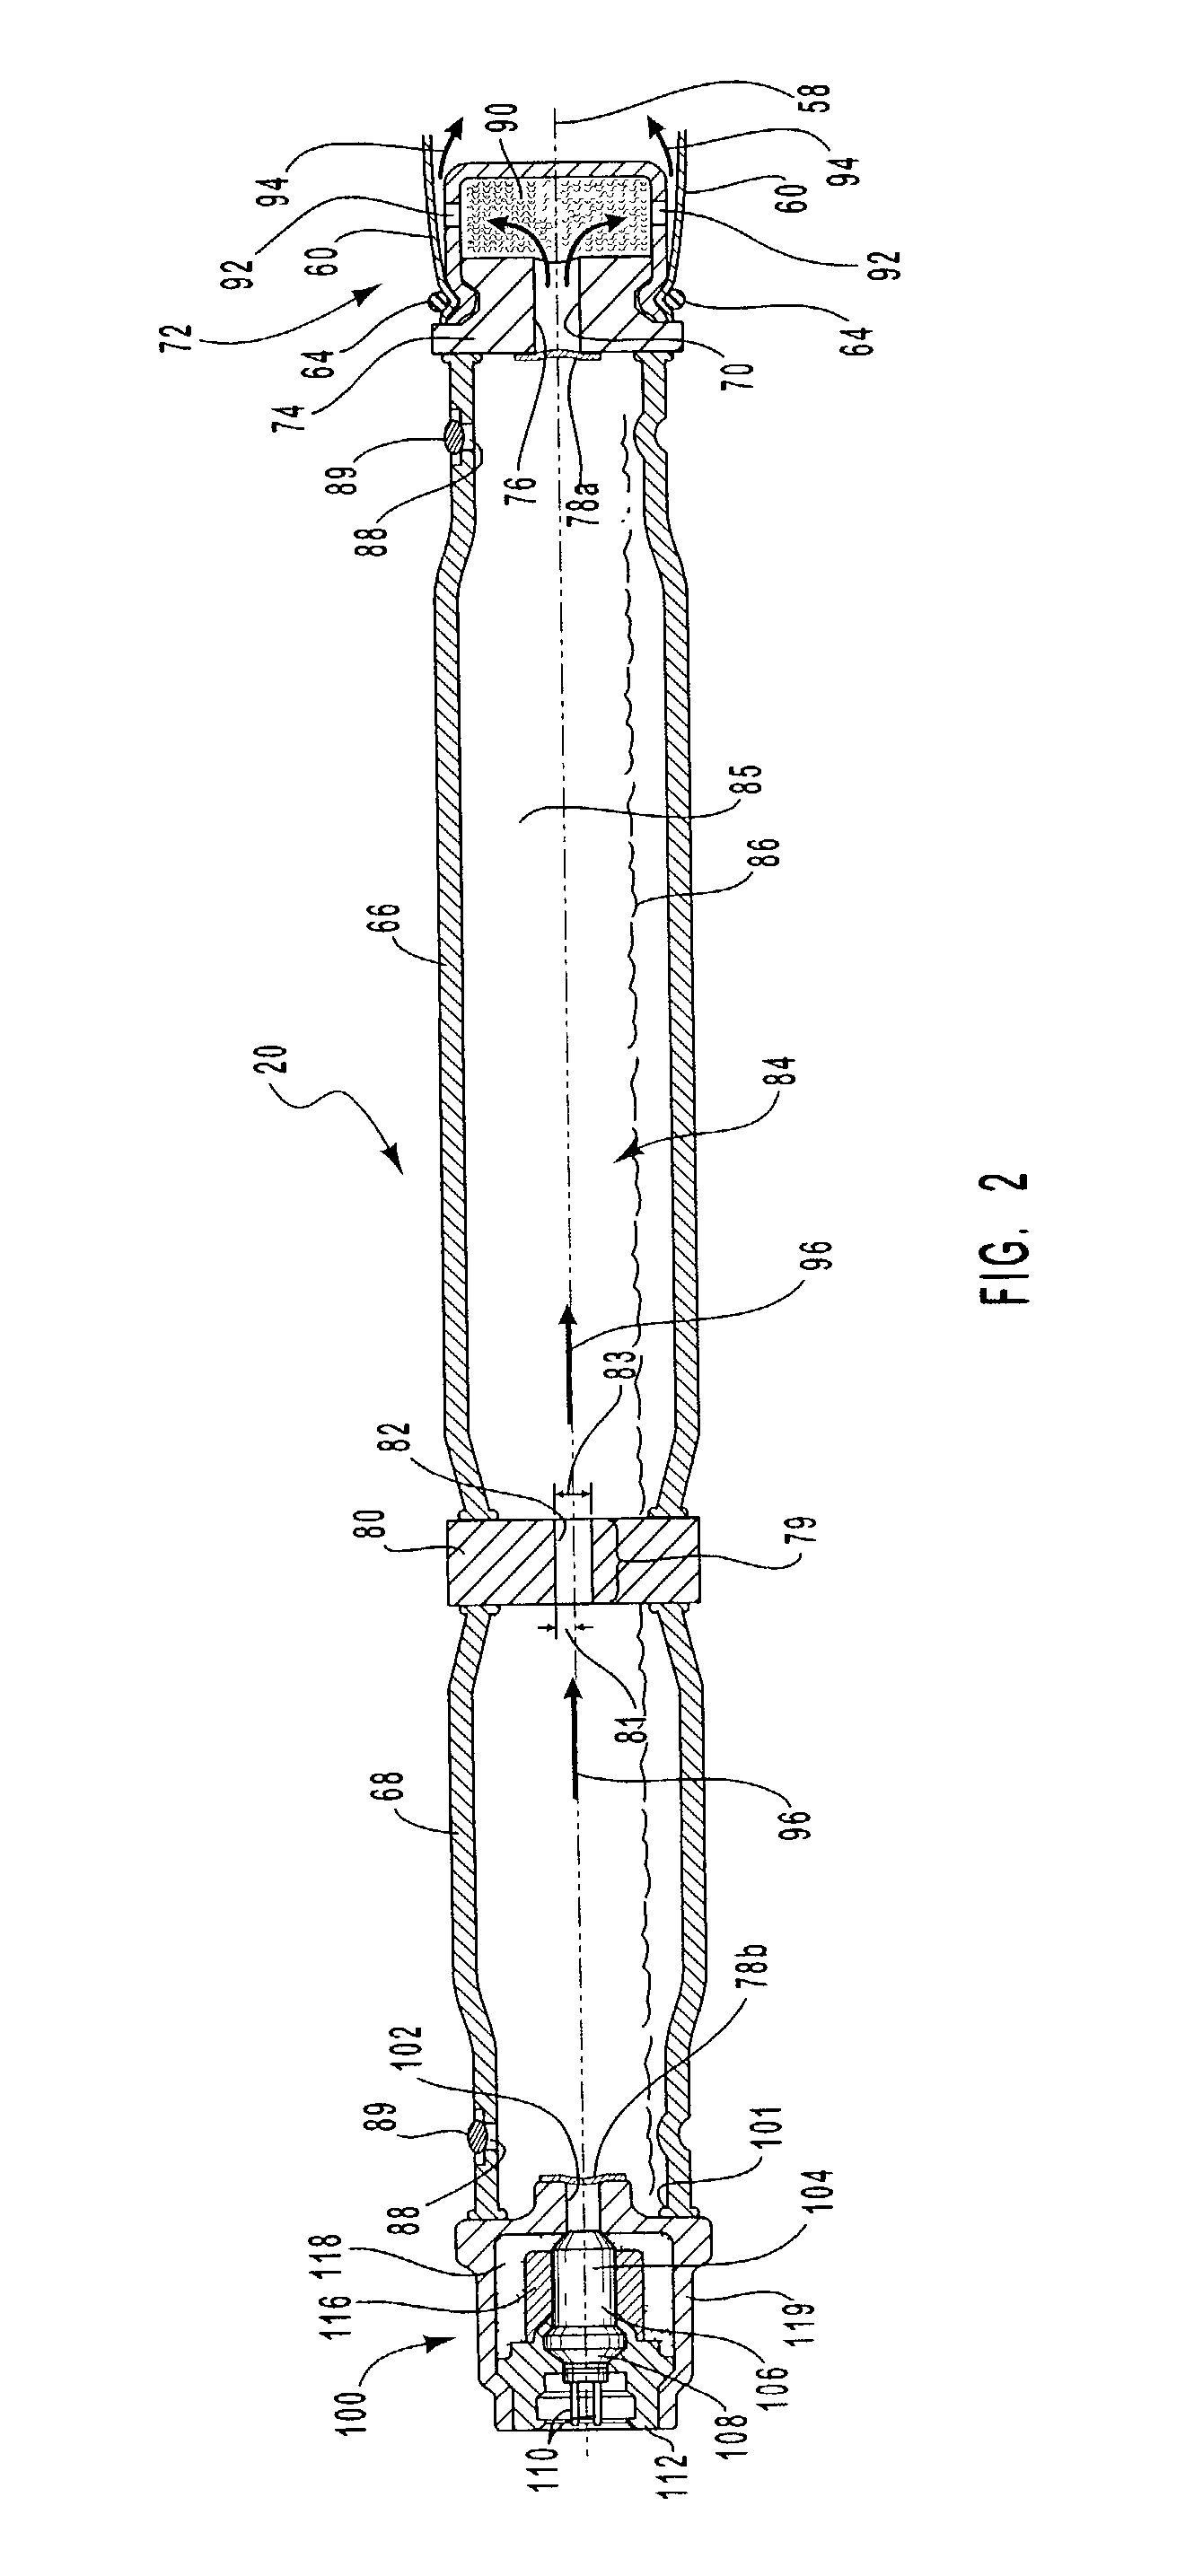 Dual stage inflator with extended gas delivery for a vehicular airbag system